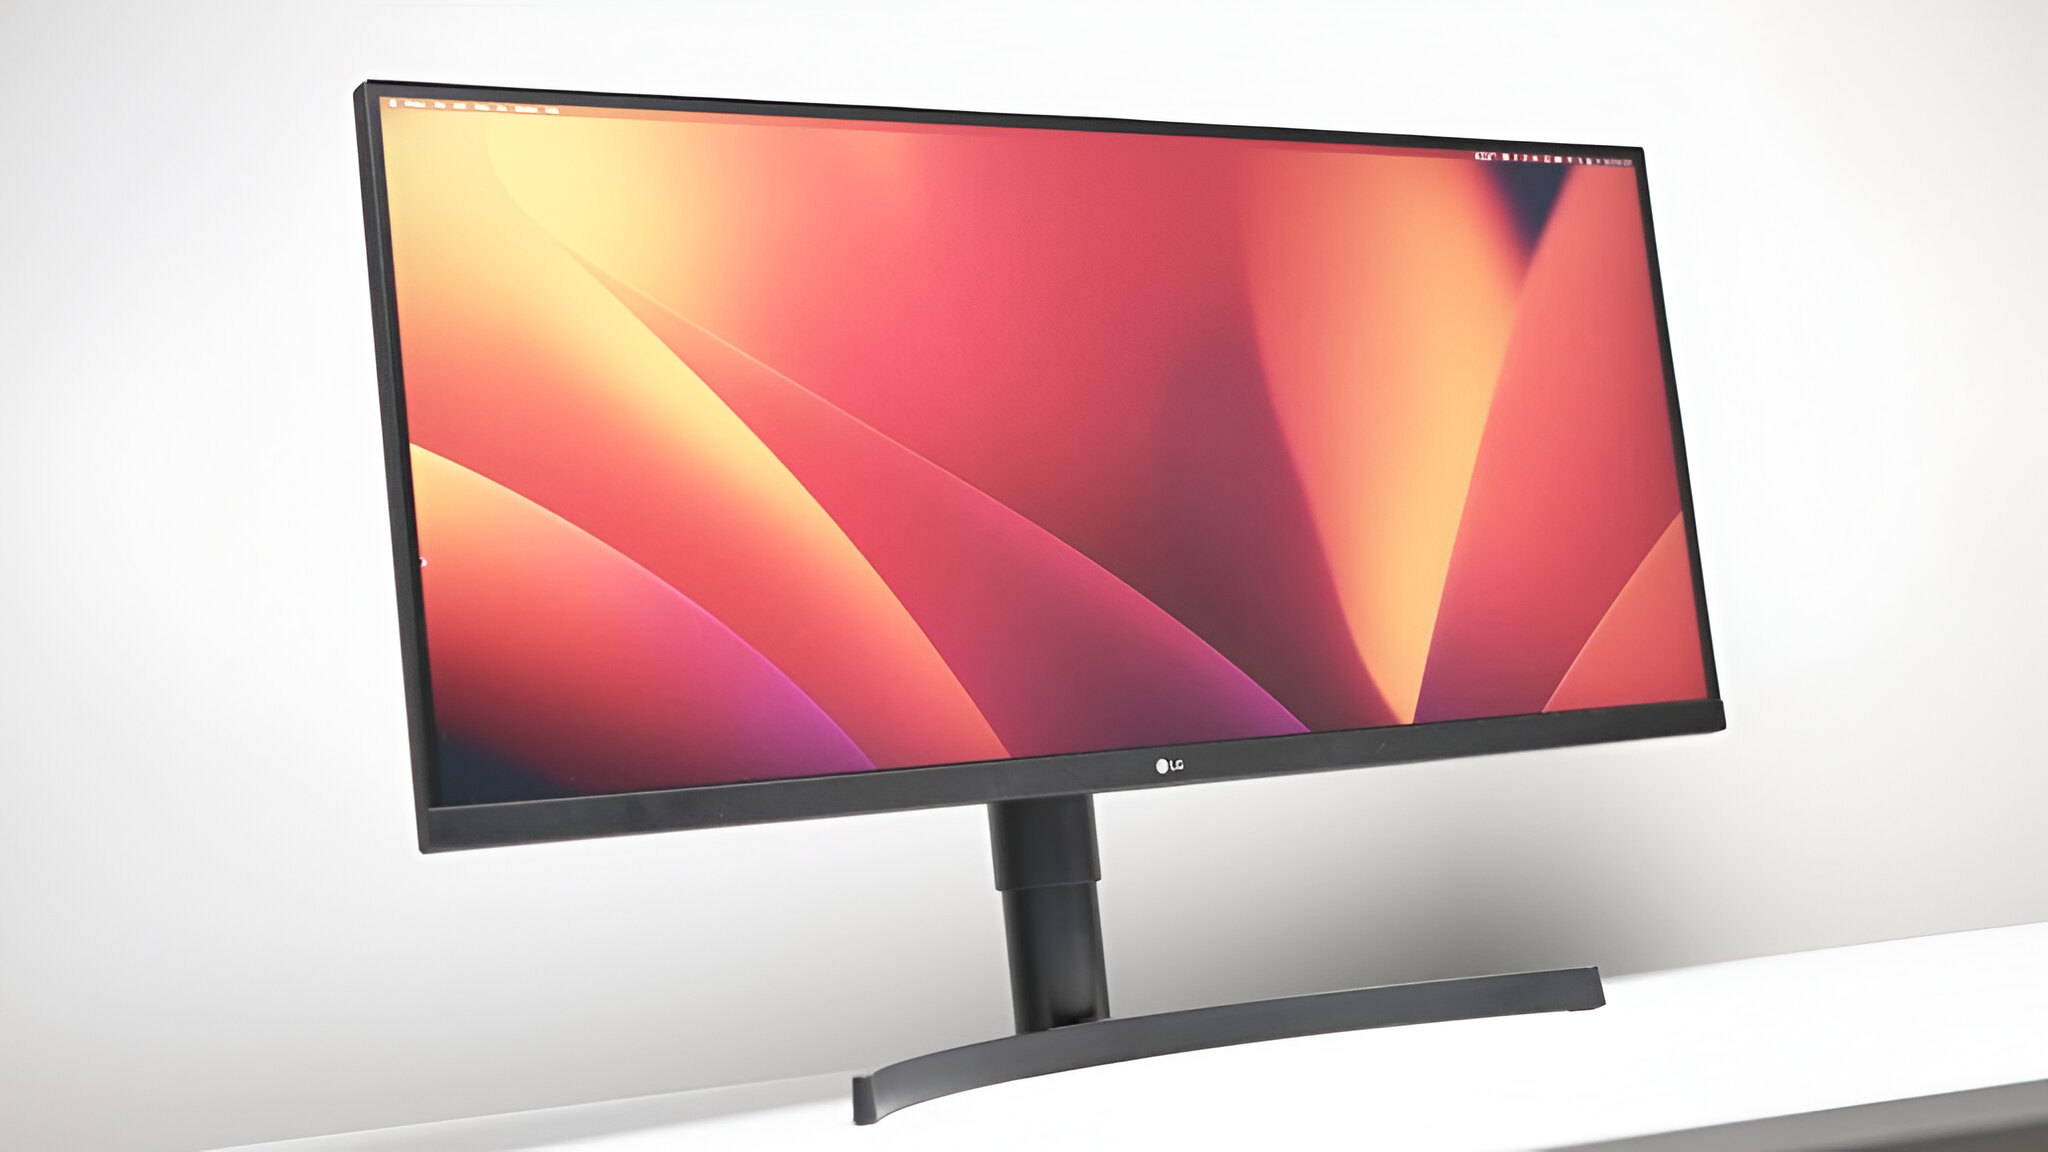 How To Adjust The Height Of An LG 34-Inch Ultrawide Monitor